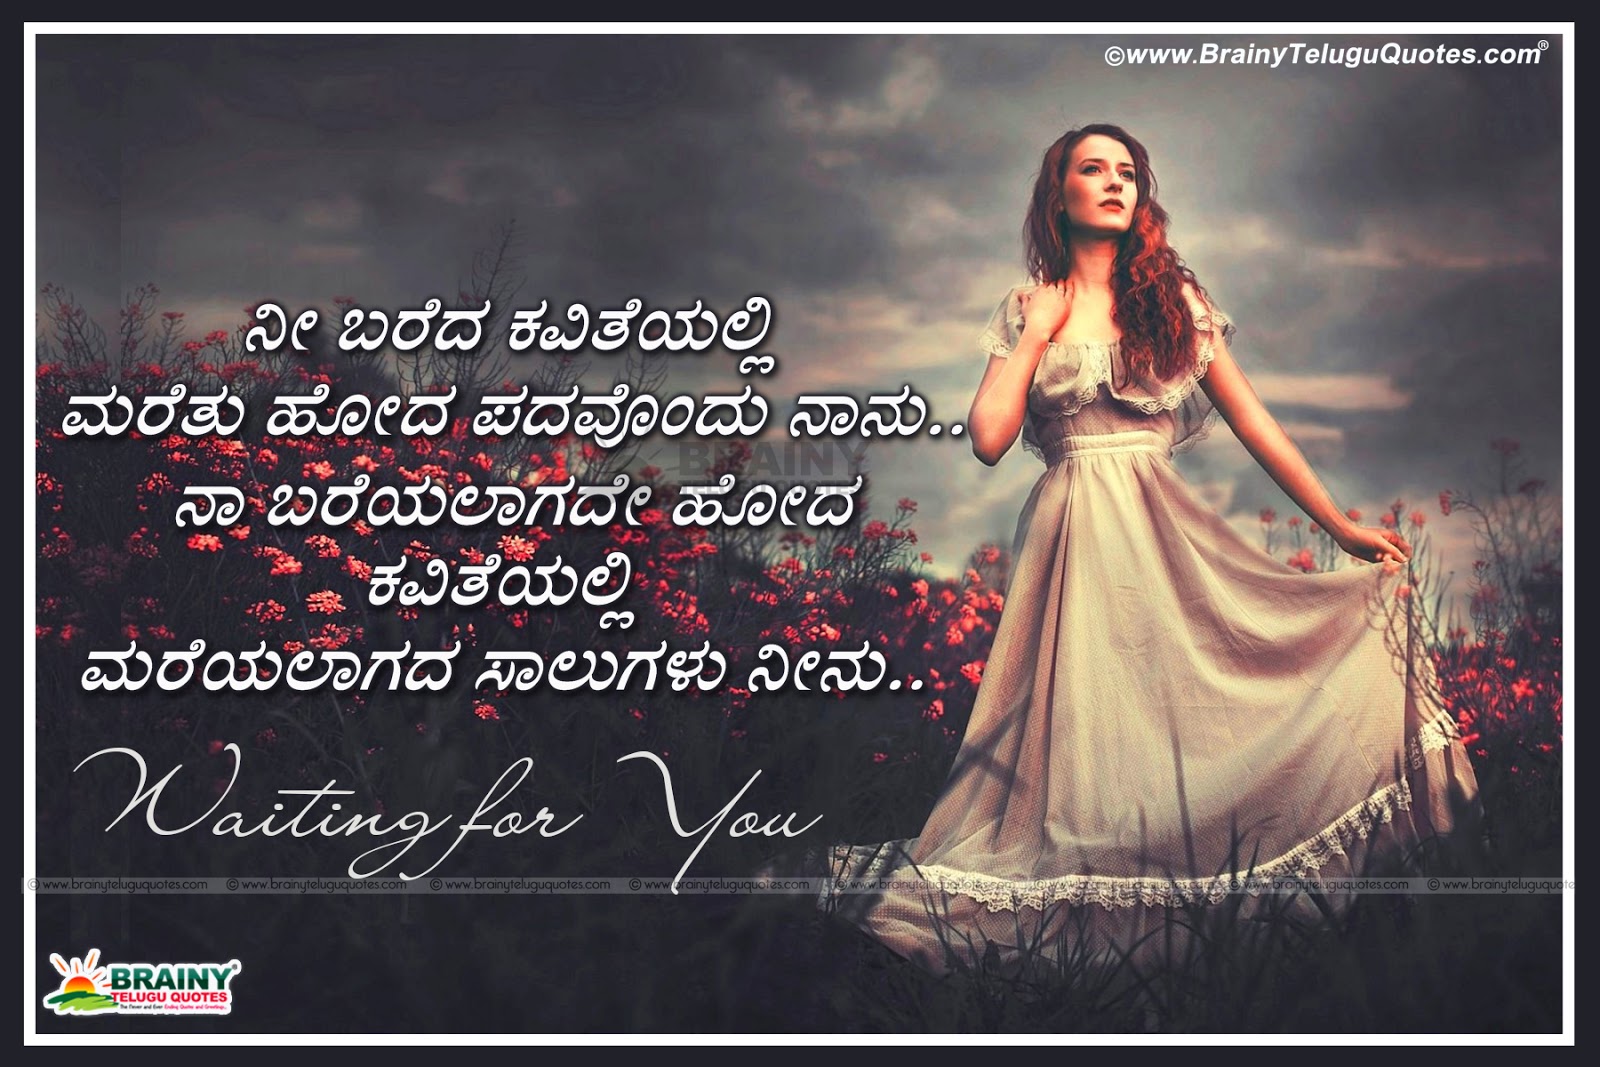 Heart touching Love failure quotes in Kannada Love failure quotes in Kannada Sad Kannada Quotes Sad alone Kannada quotes Heart touching sad love quotes in